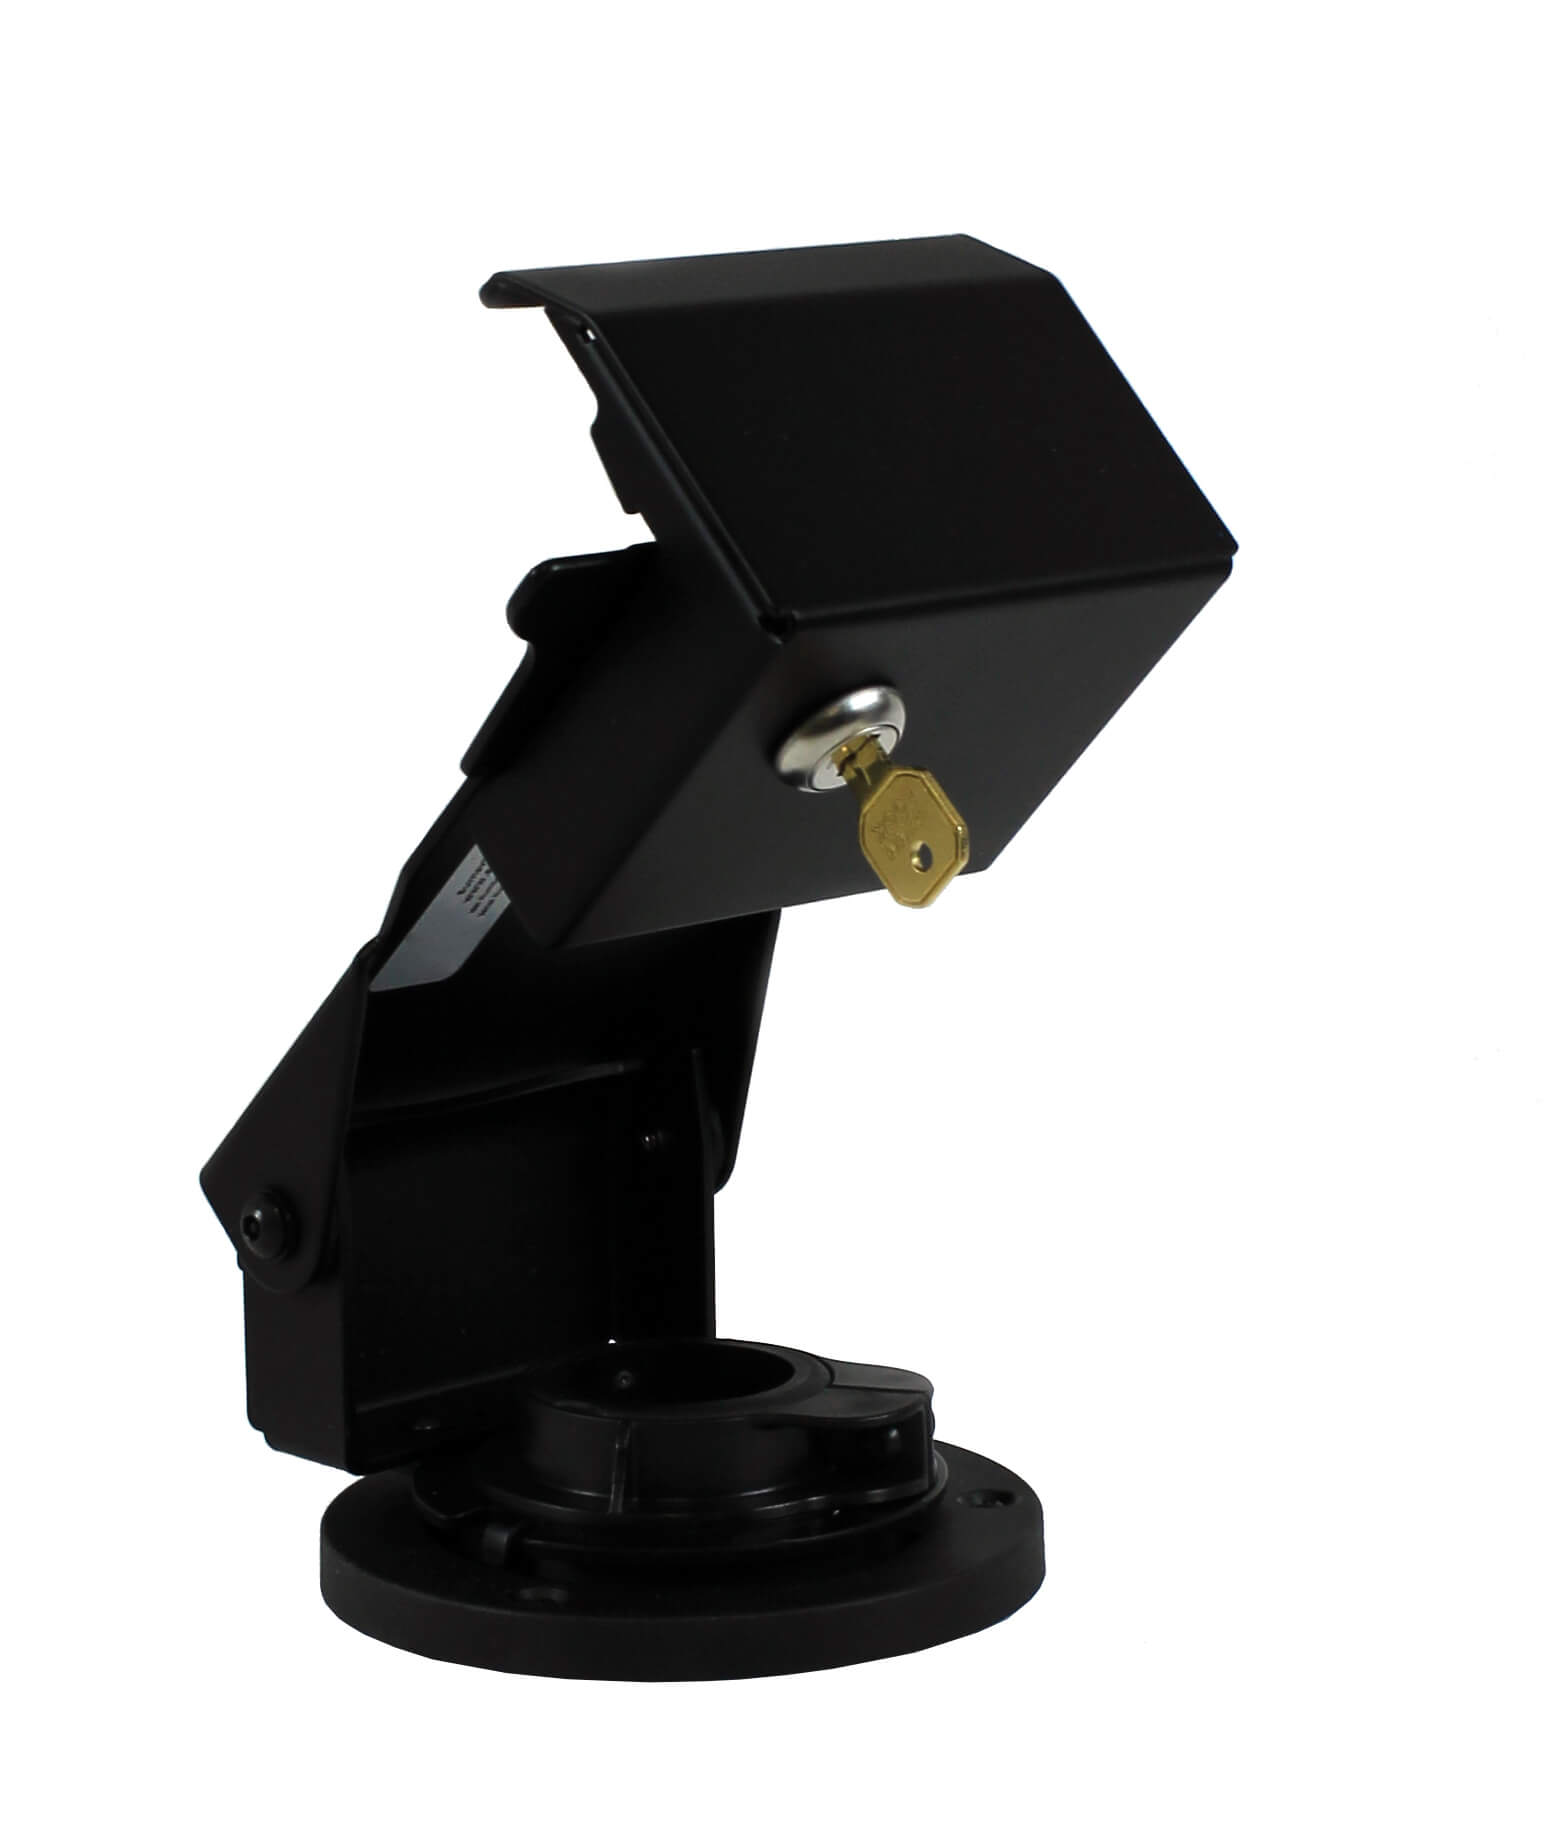 Round Base Metal Stand with Locking Plate & Anti-Skimming for Verifone MX915 Payment Terminals